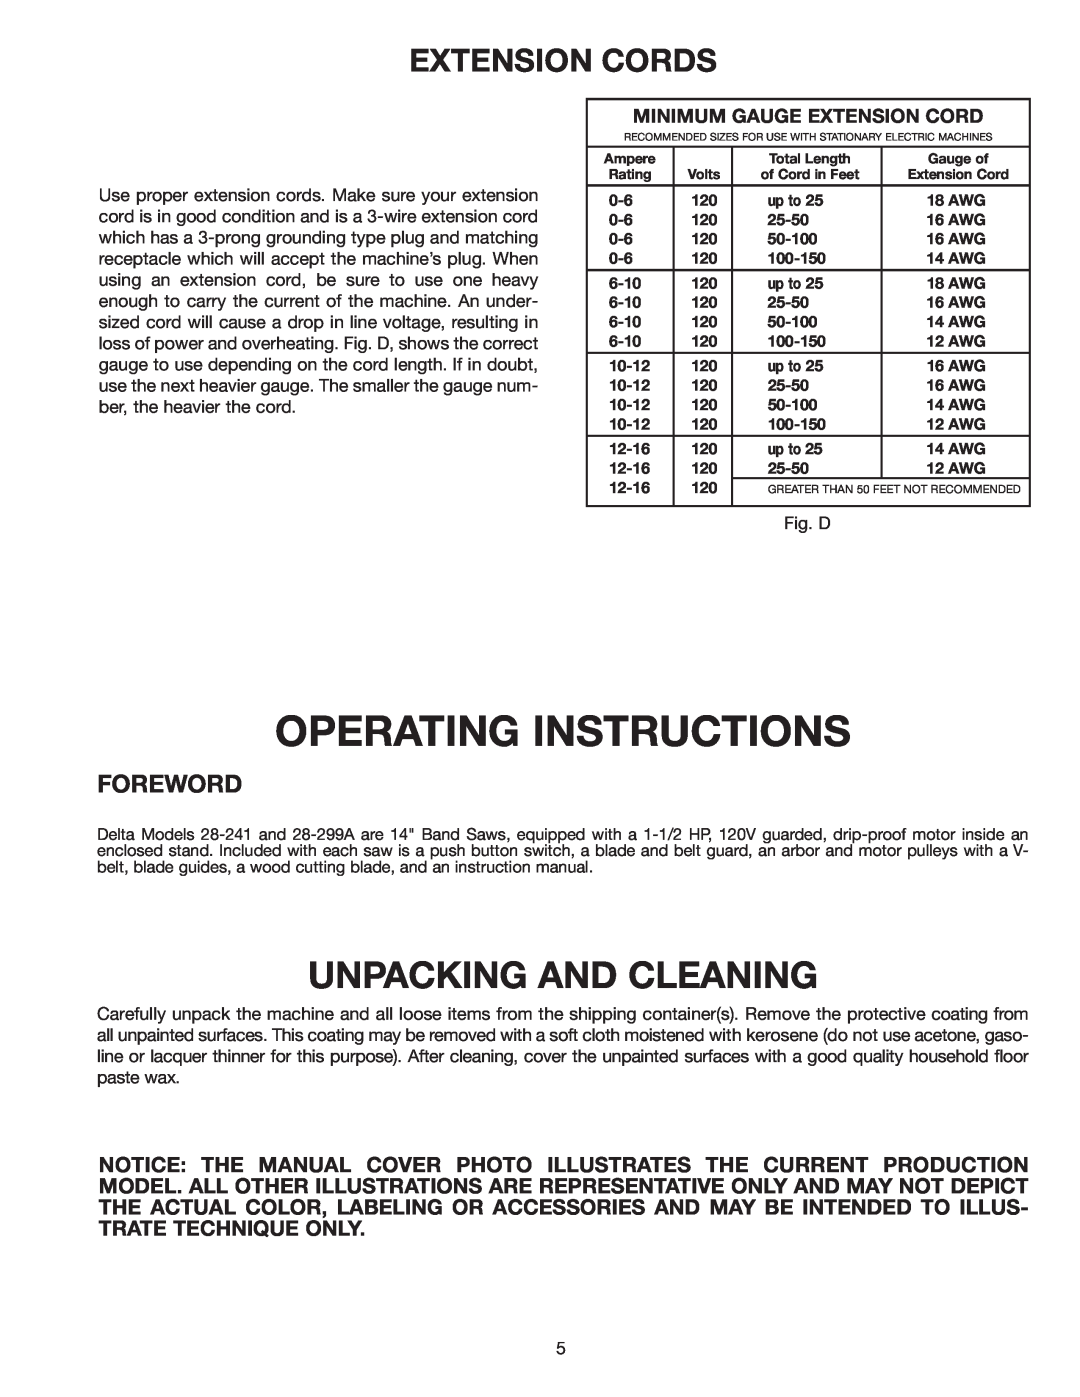 Delta 28-241 Unpacking And Cleaning, Extension Cords, Operating Instructions, Foreword, Minimum Gauge Extension Cord 